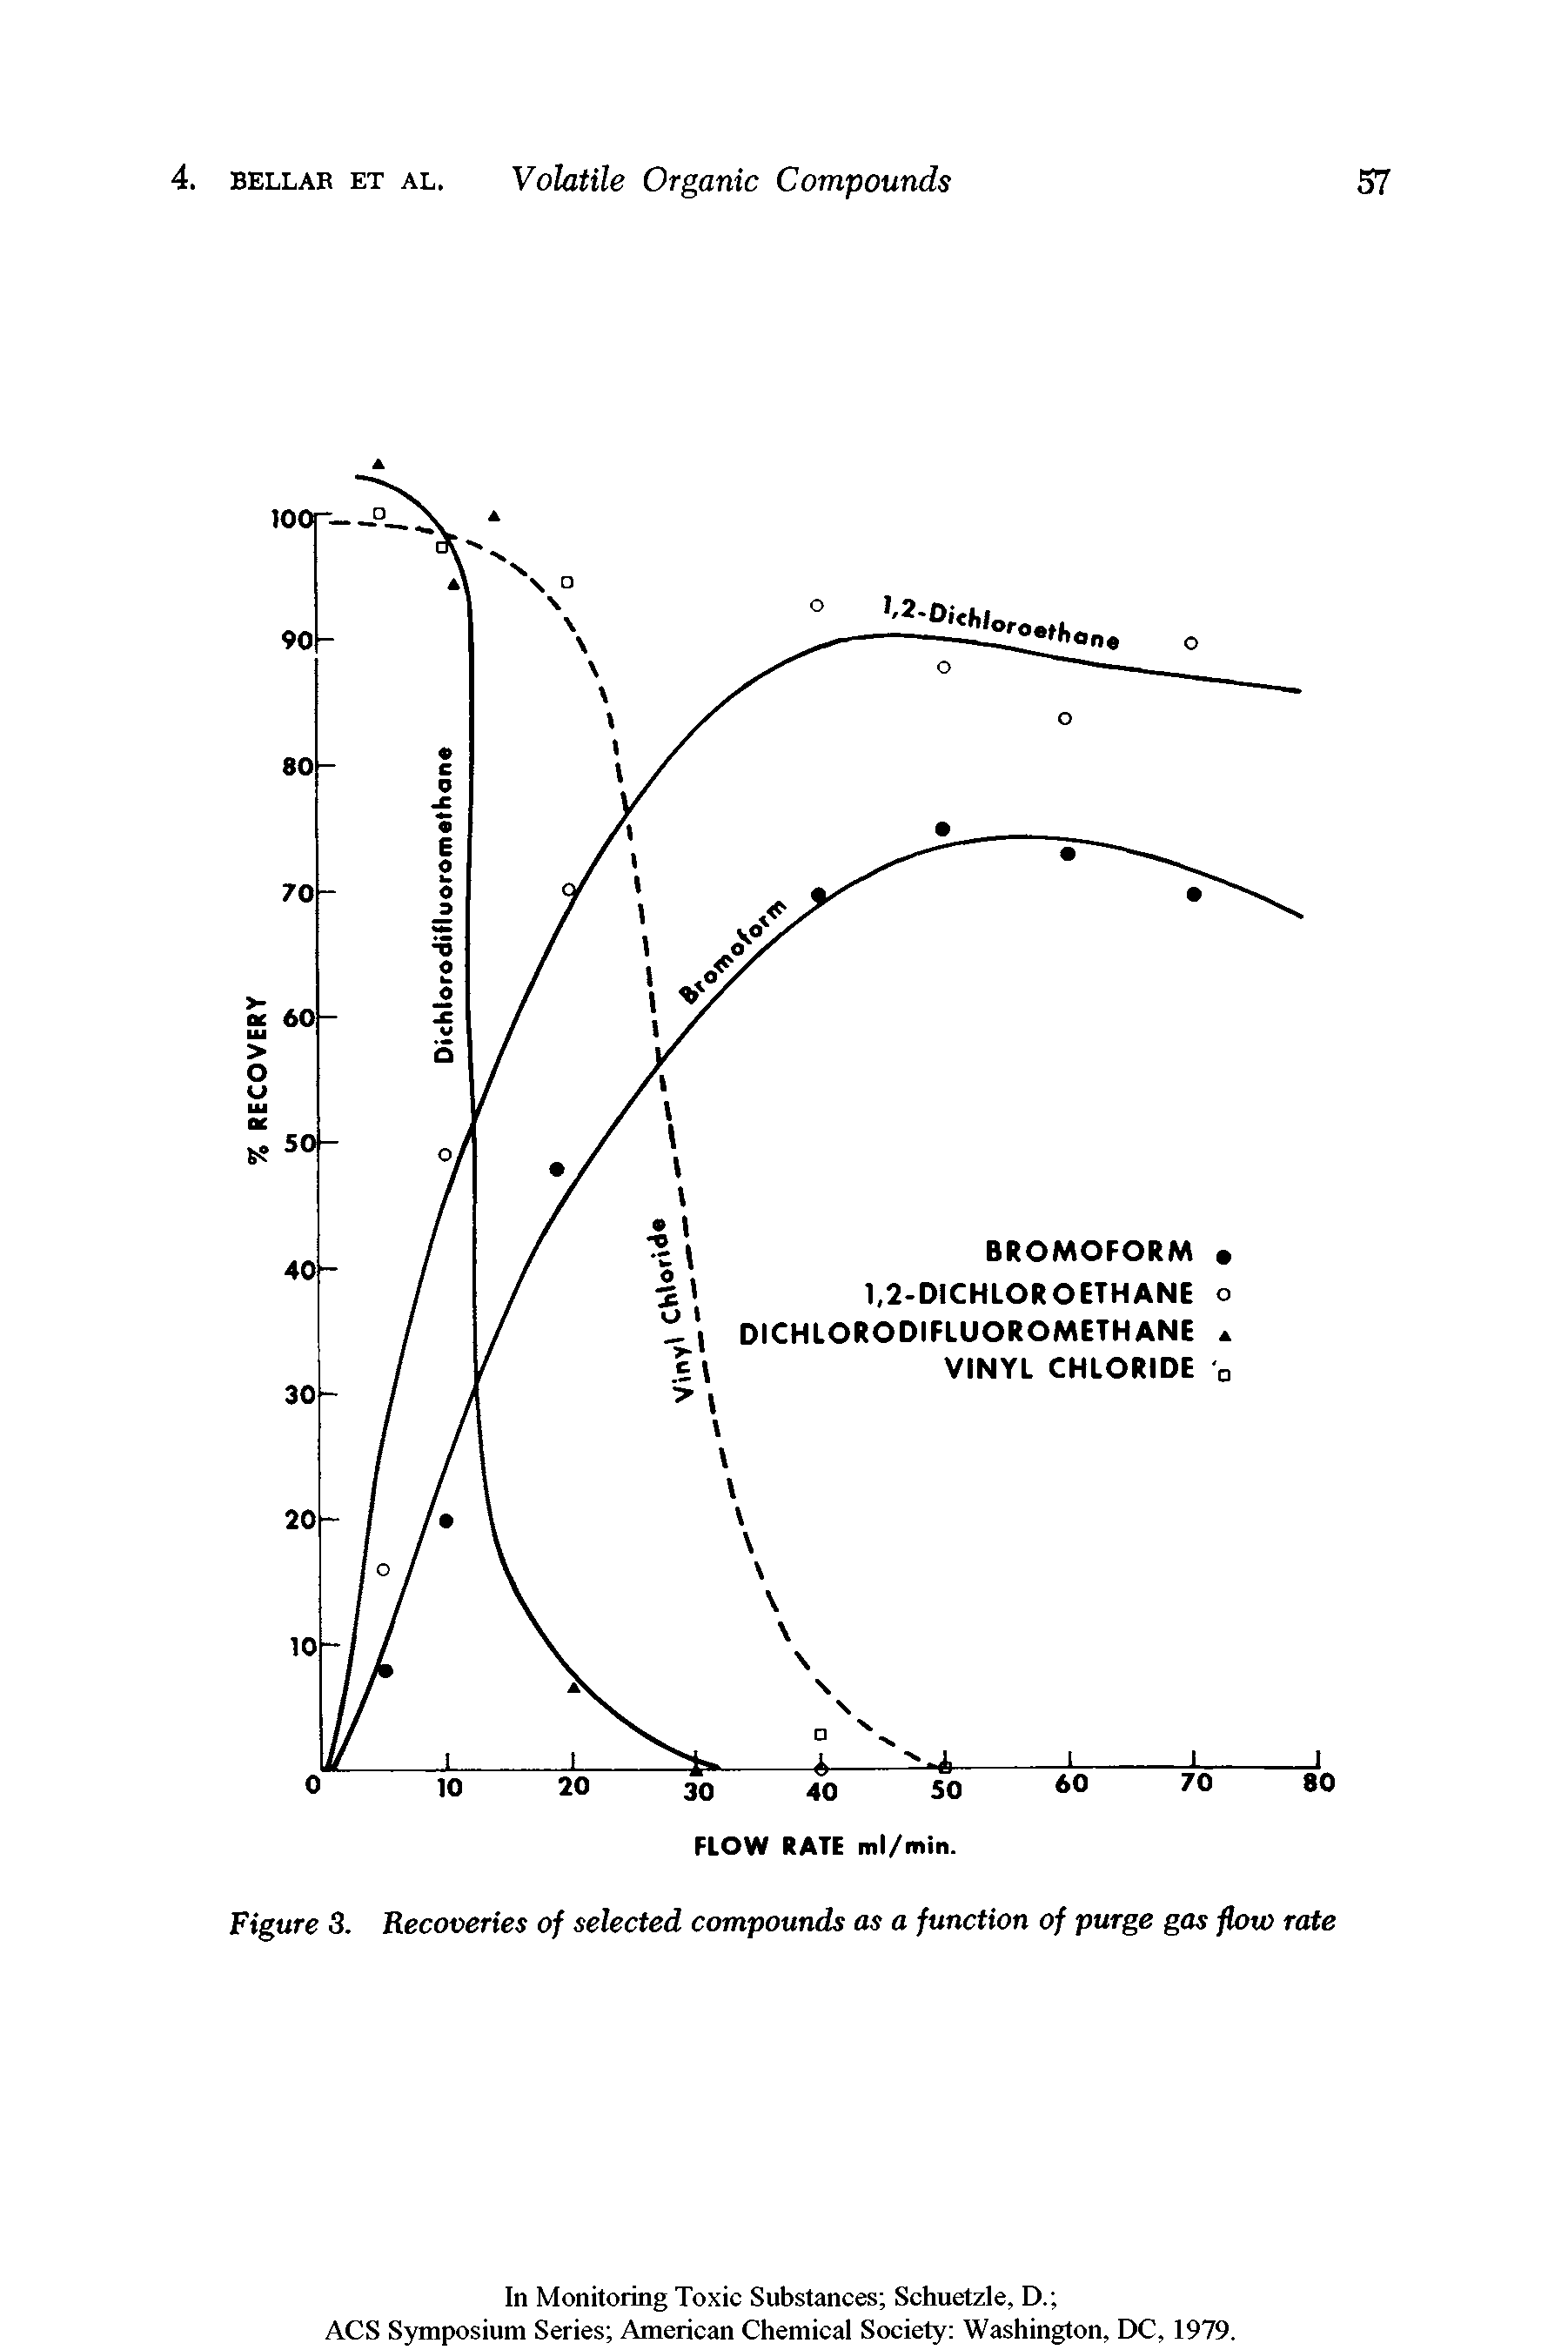 Figure 3. Recoveries of selected compounds as a function of purge gas flow rate...